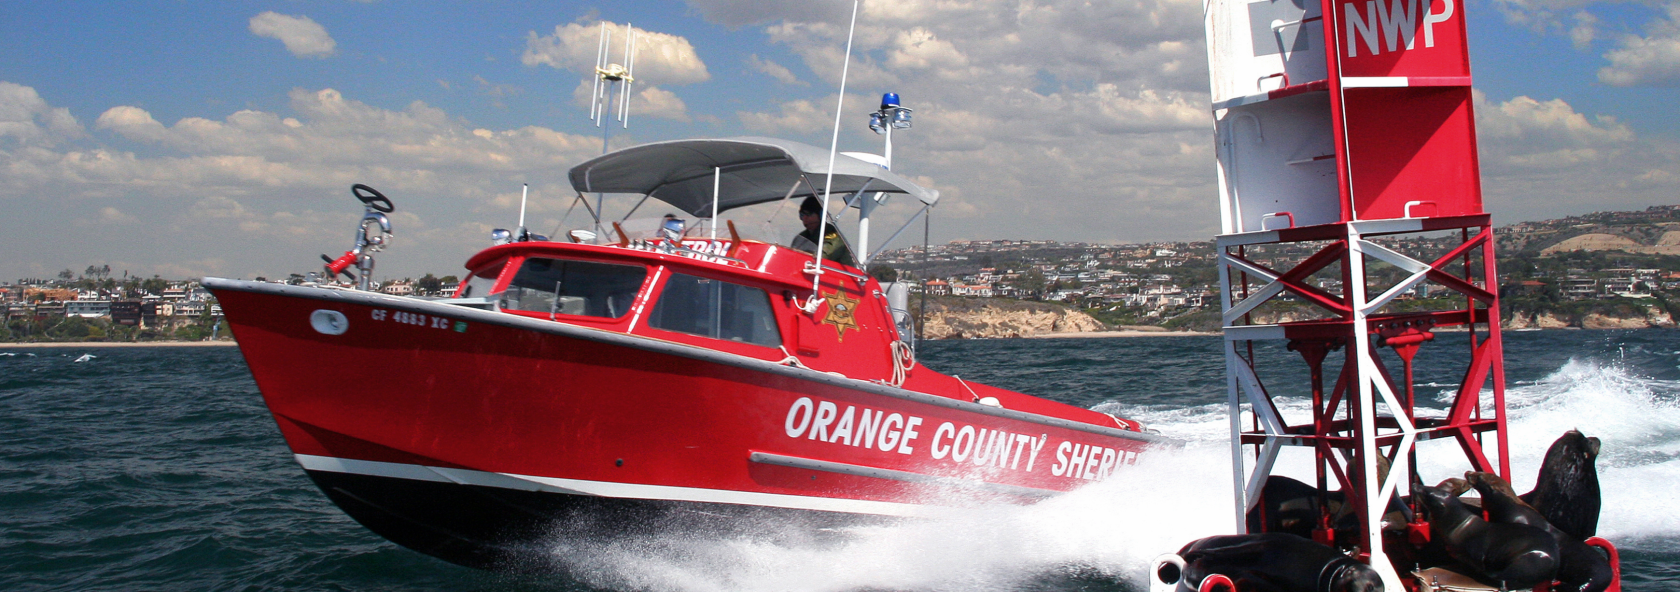 fire boat banner resize